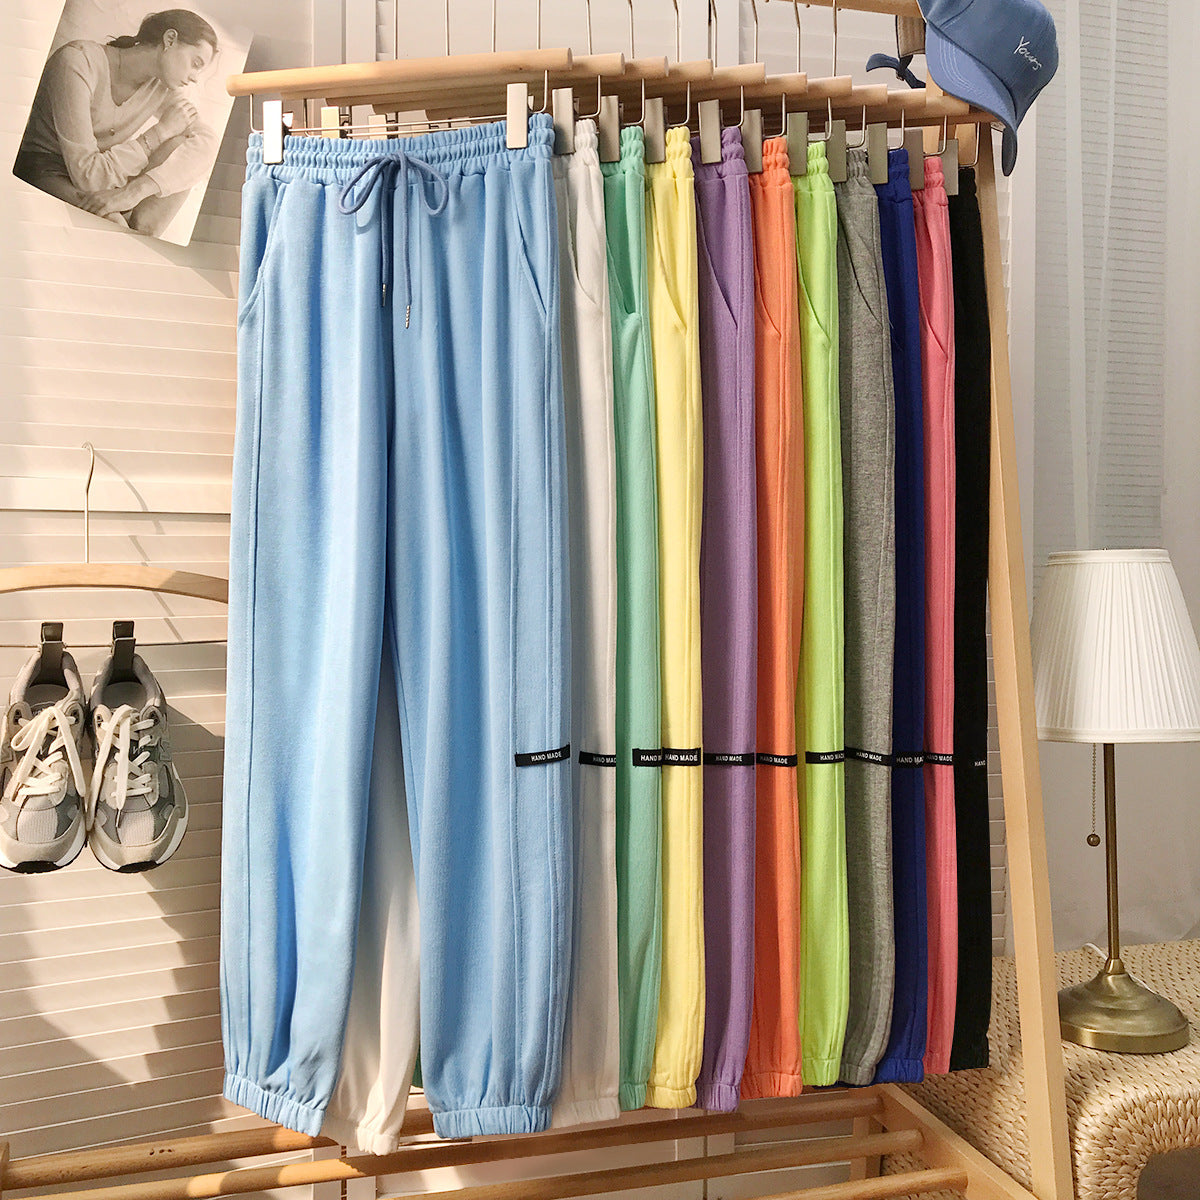 Ladies' Sweatpants Candy-Colored, Loose-Fitting, Casual Harem Style